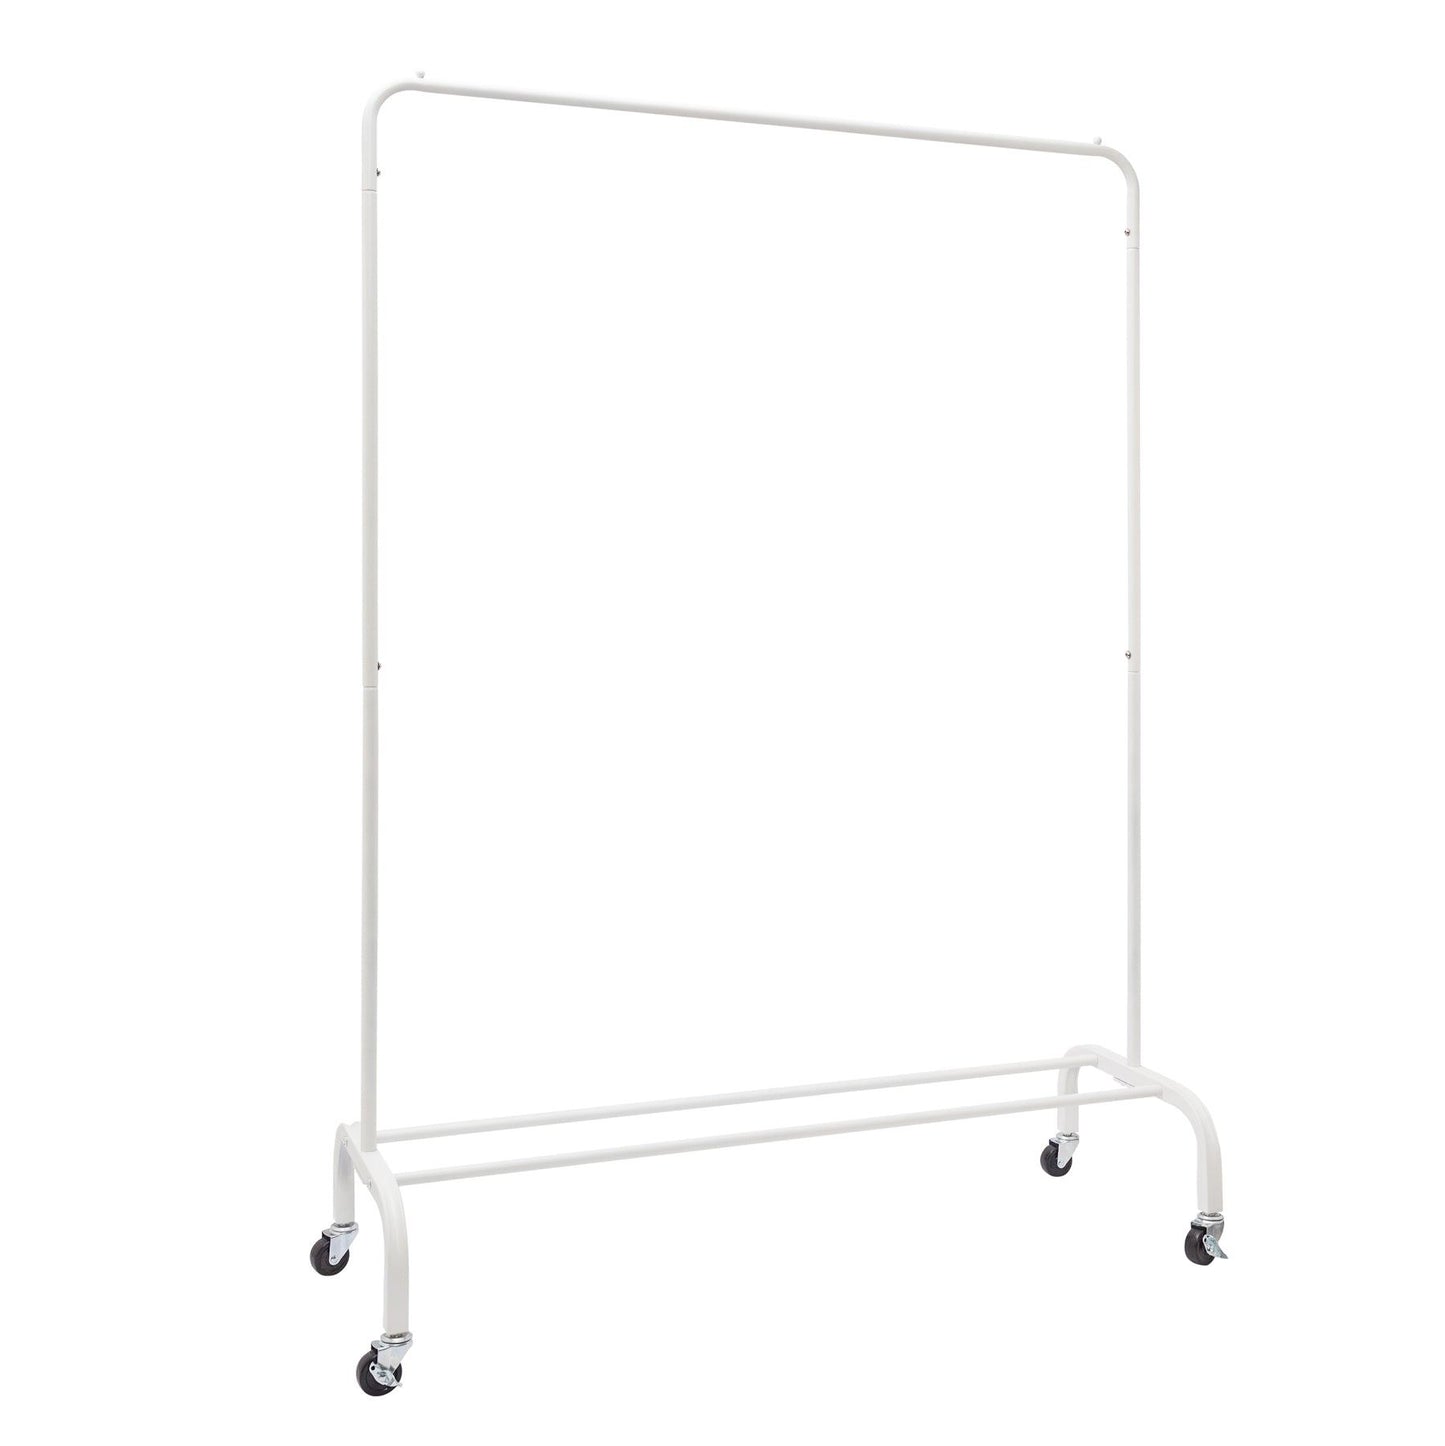 Clothes Rack with Extra Thick Rails - White - 60kgs Weight Capacity ...